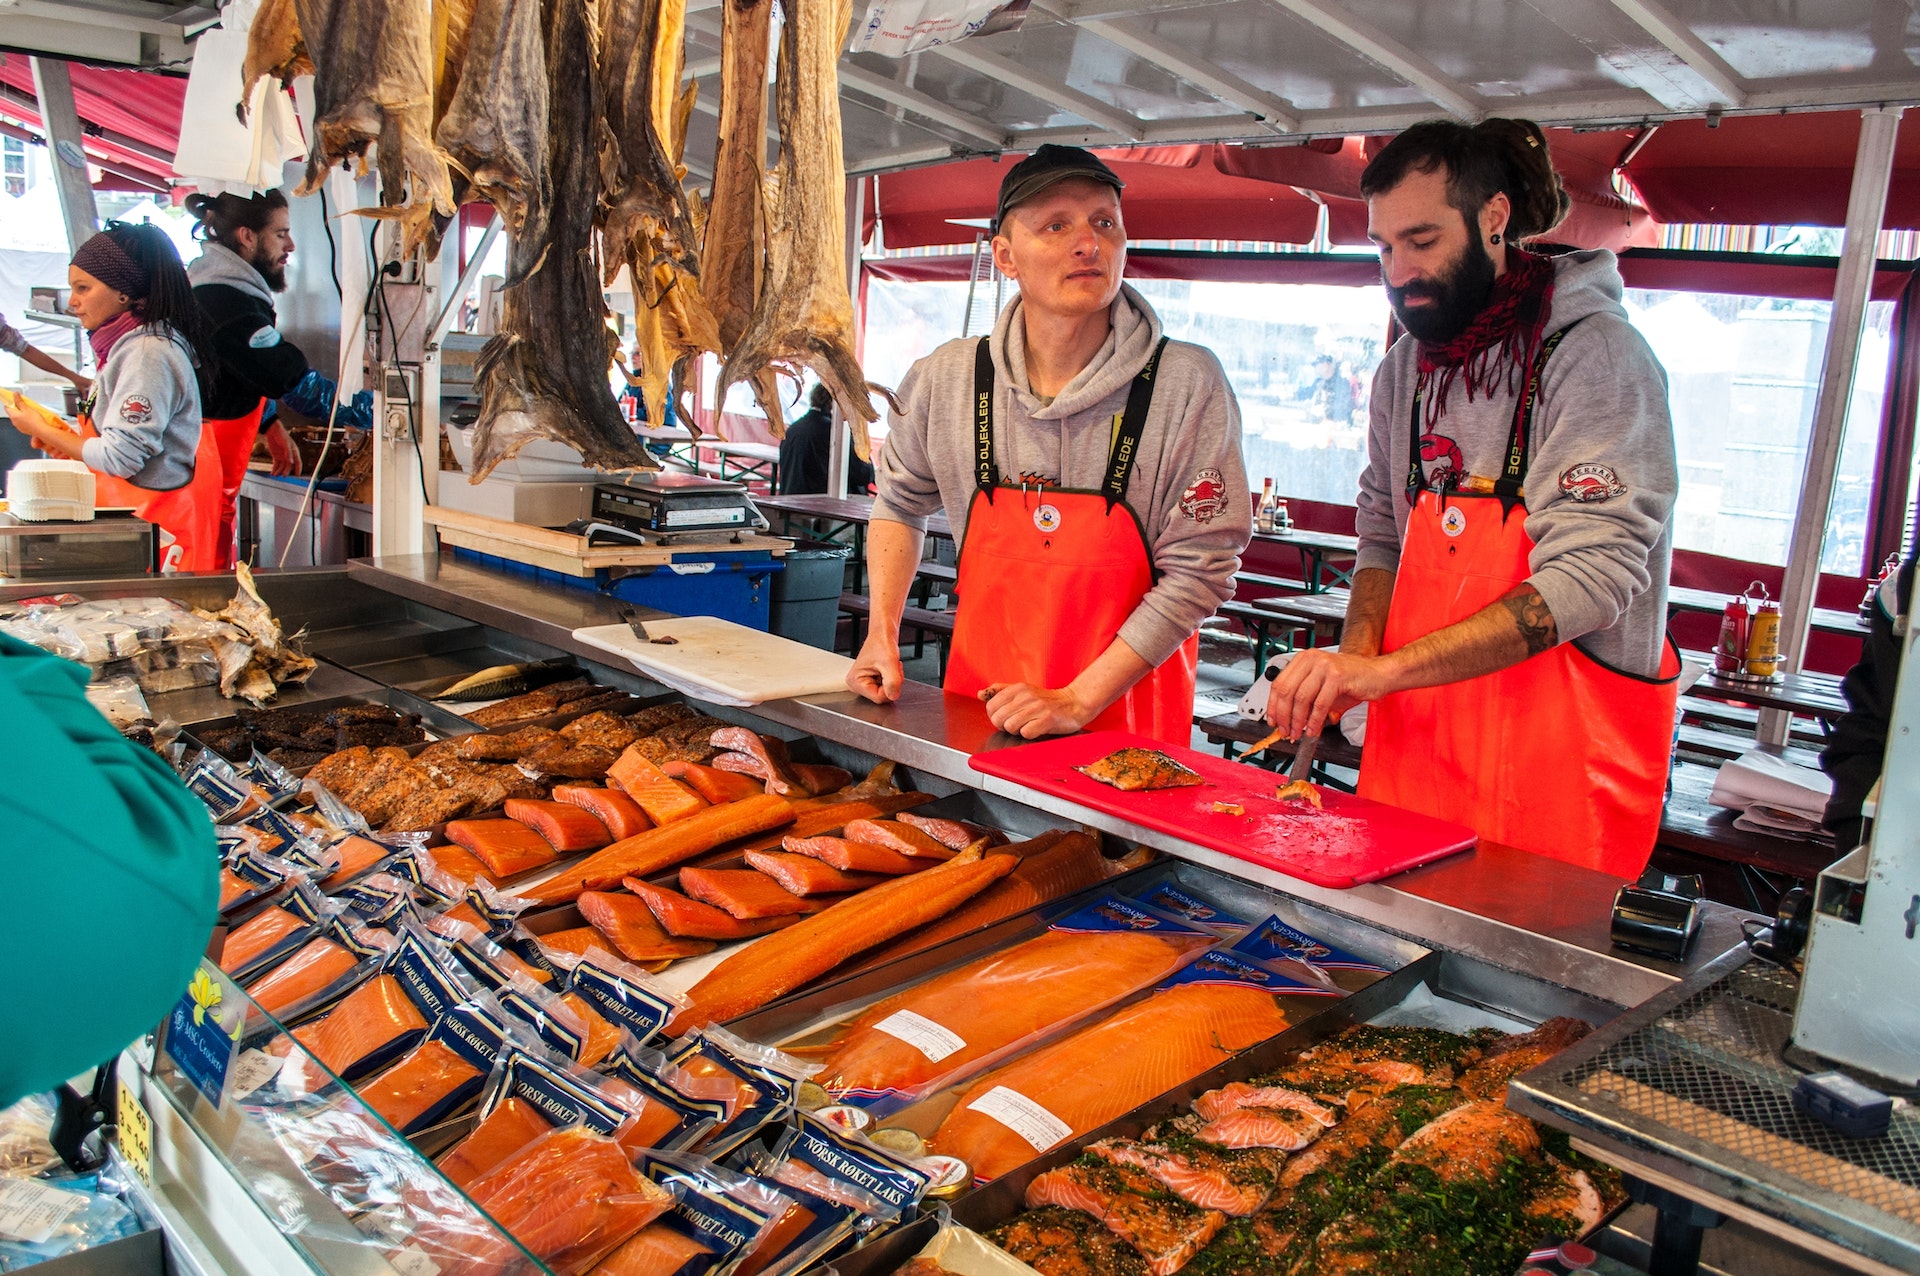 Two sellers of fresh fish at the fish market in red aprons in Begren